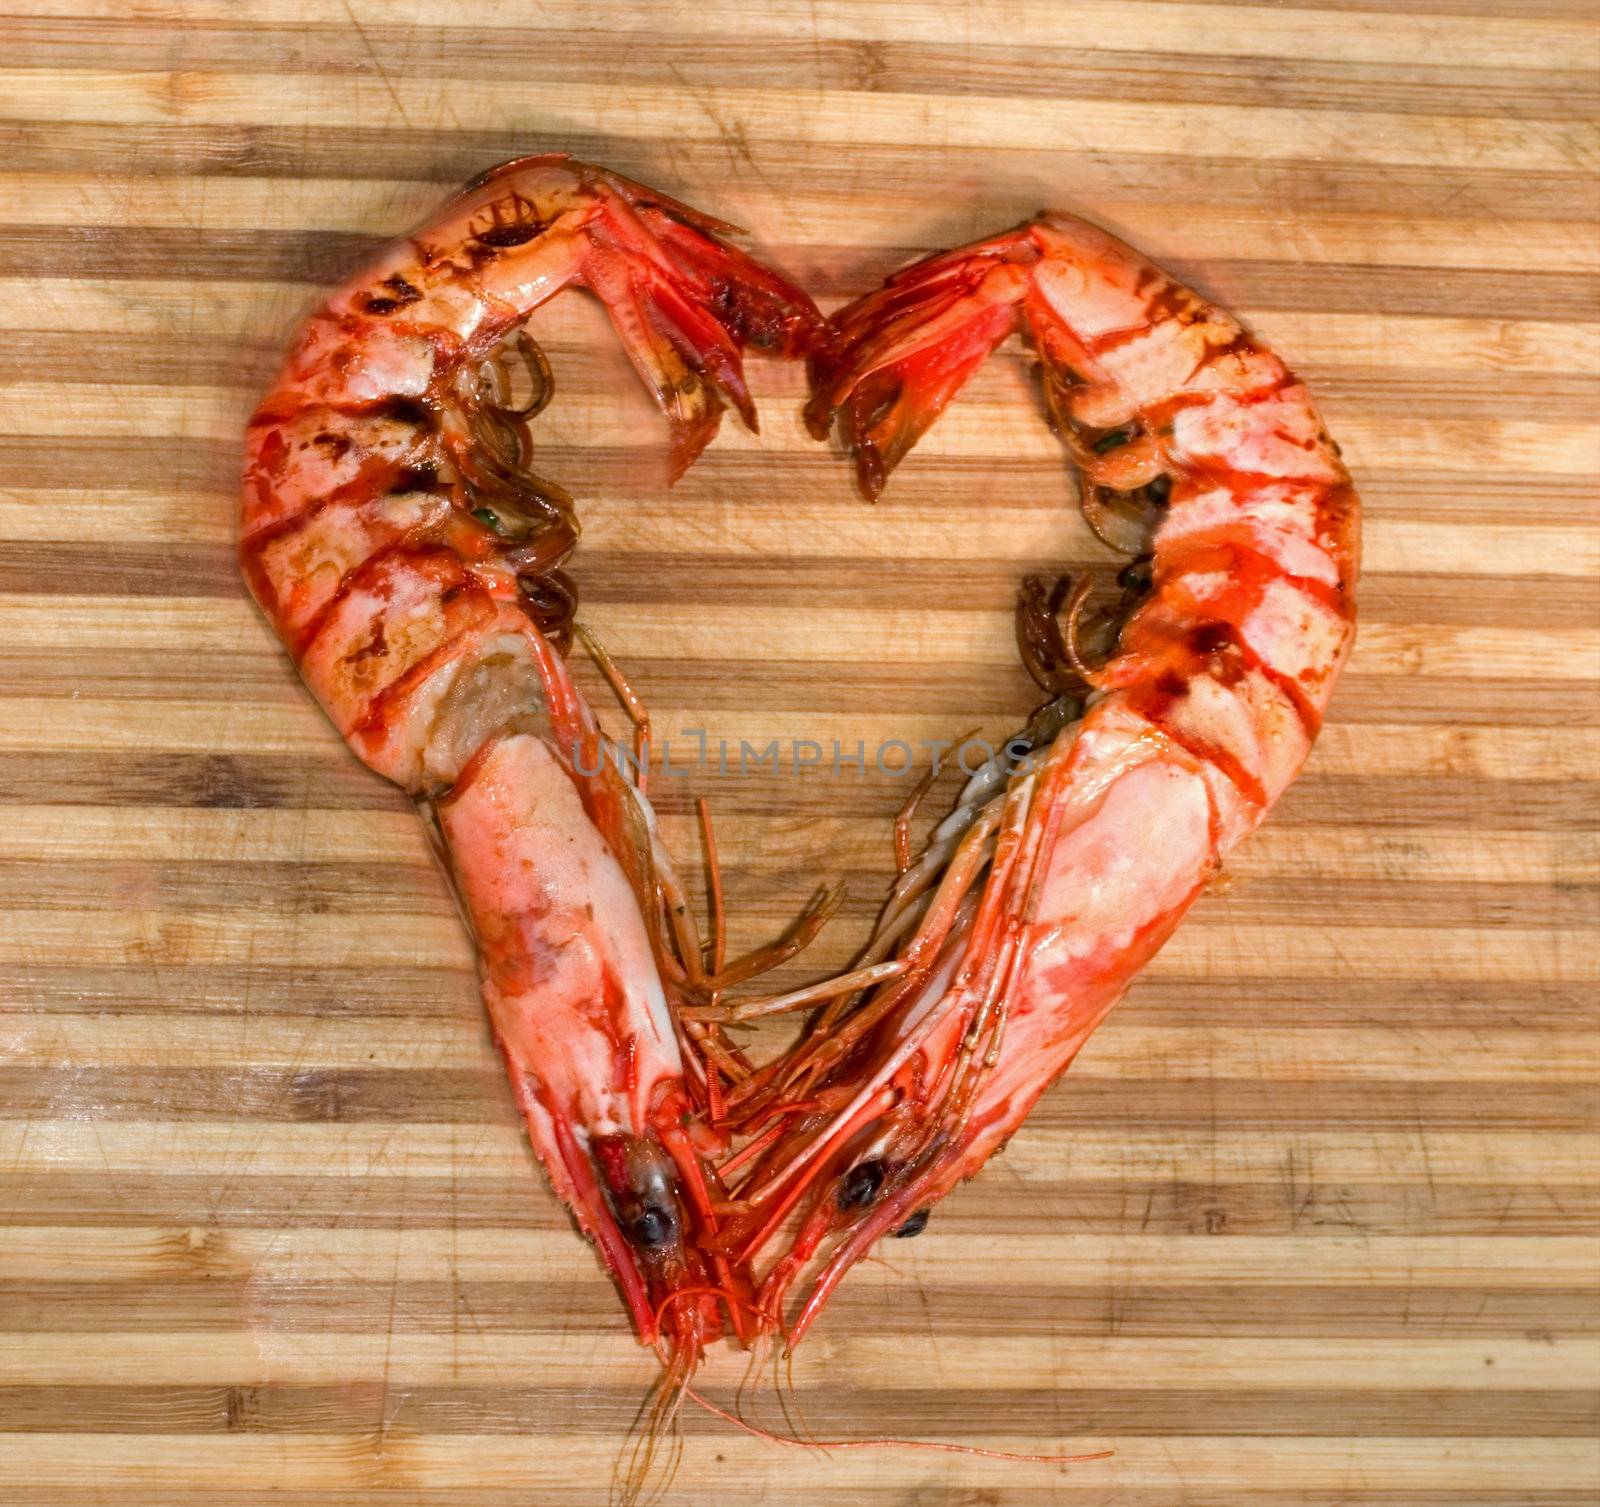 prepared shrimp forming a heart on striped wood texture